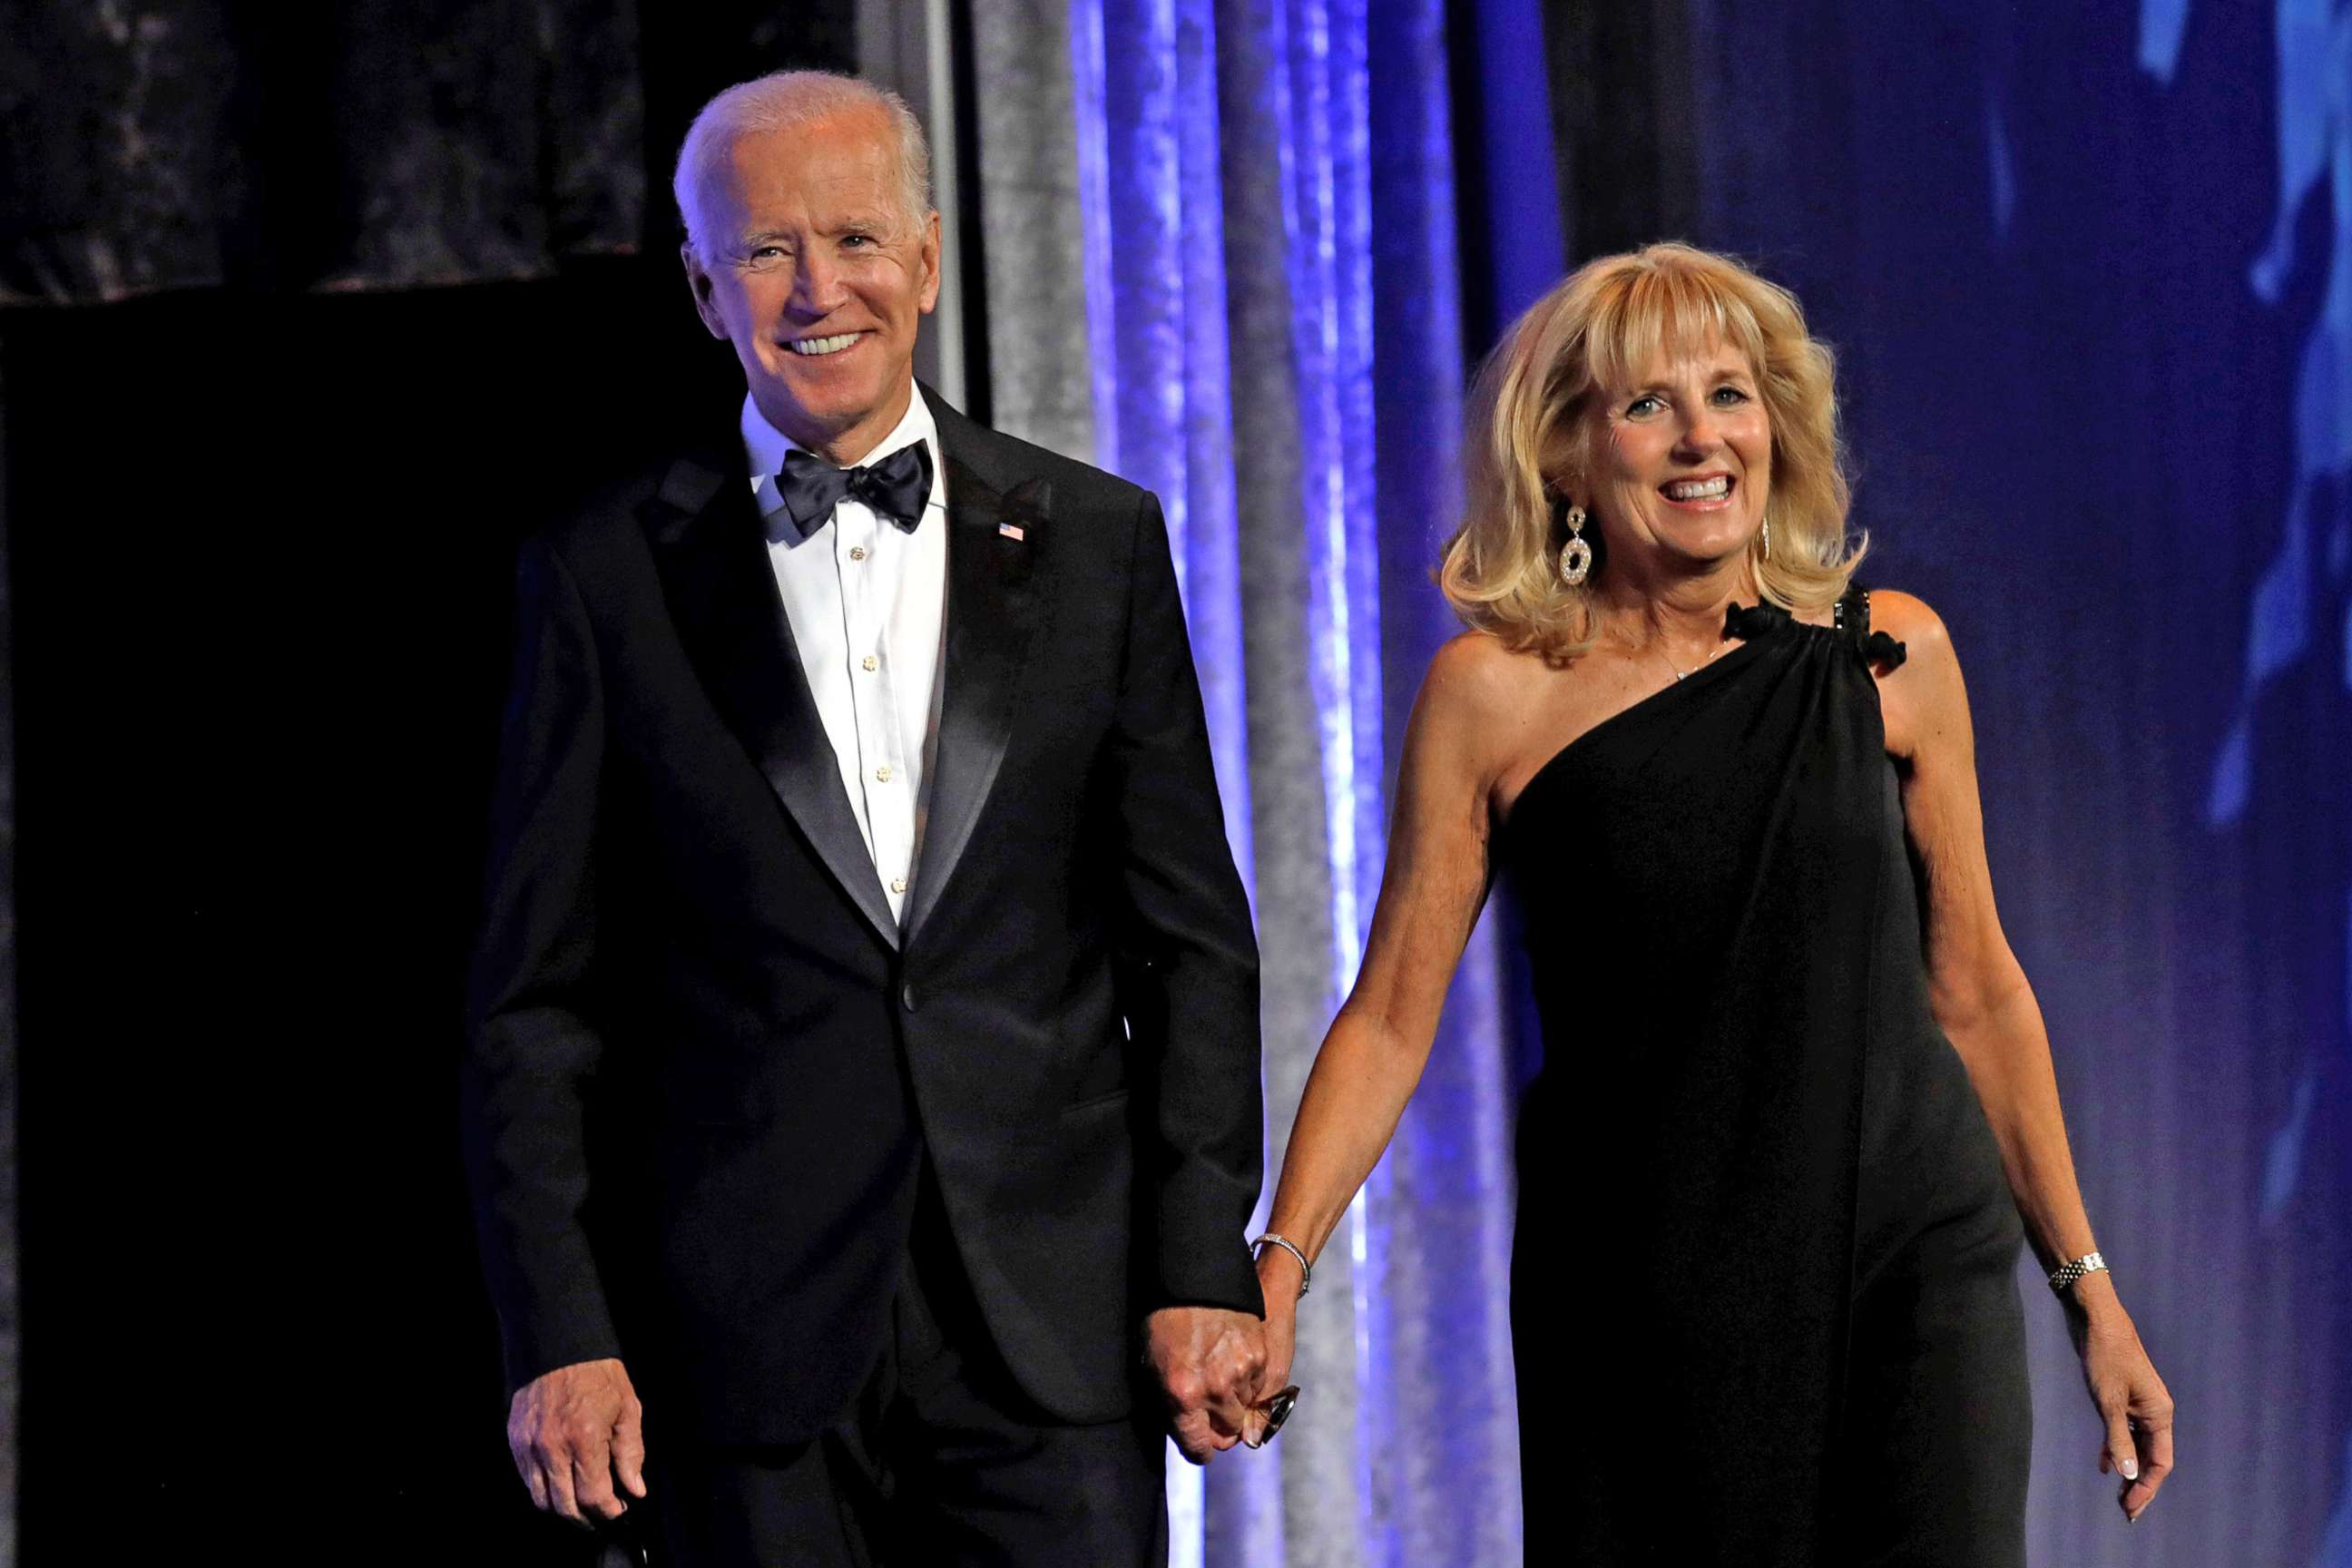 PHOTO: Former Vice President Joe Biden, with his wife Jill Biden, arrives to address the Human Rights Campaign dinner in Washington, D.C., Sept. 15, 2018.  